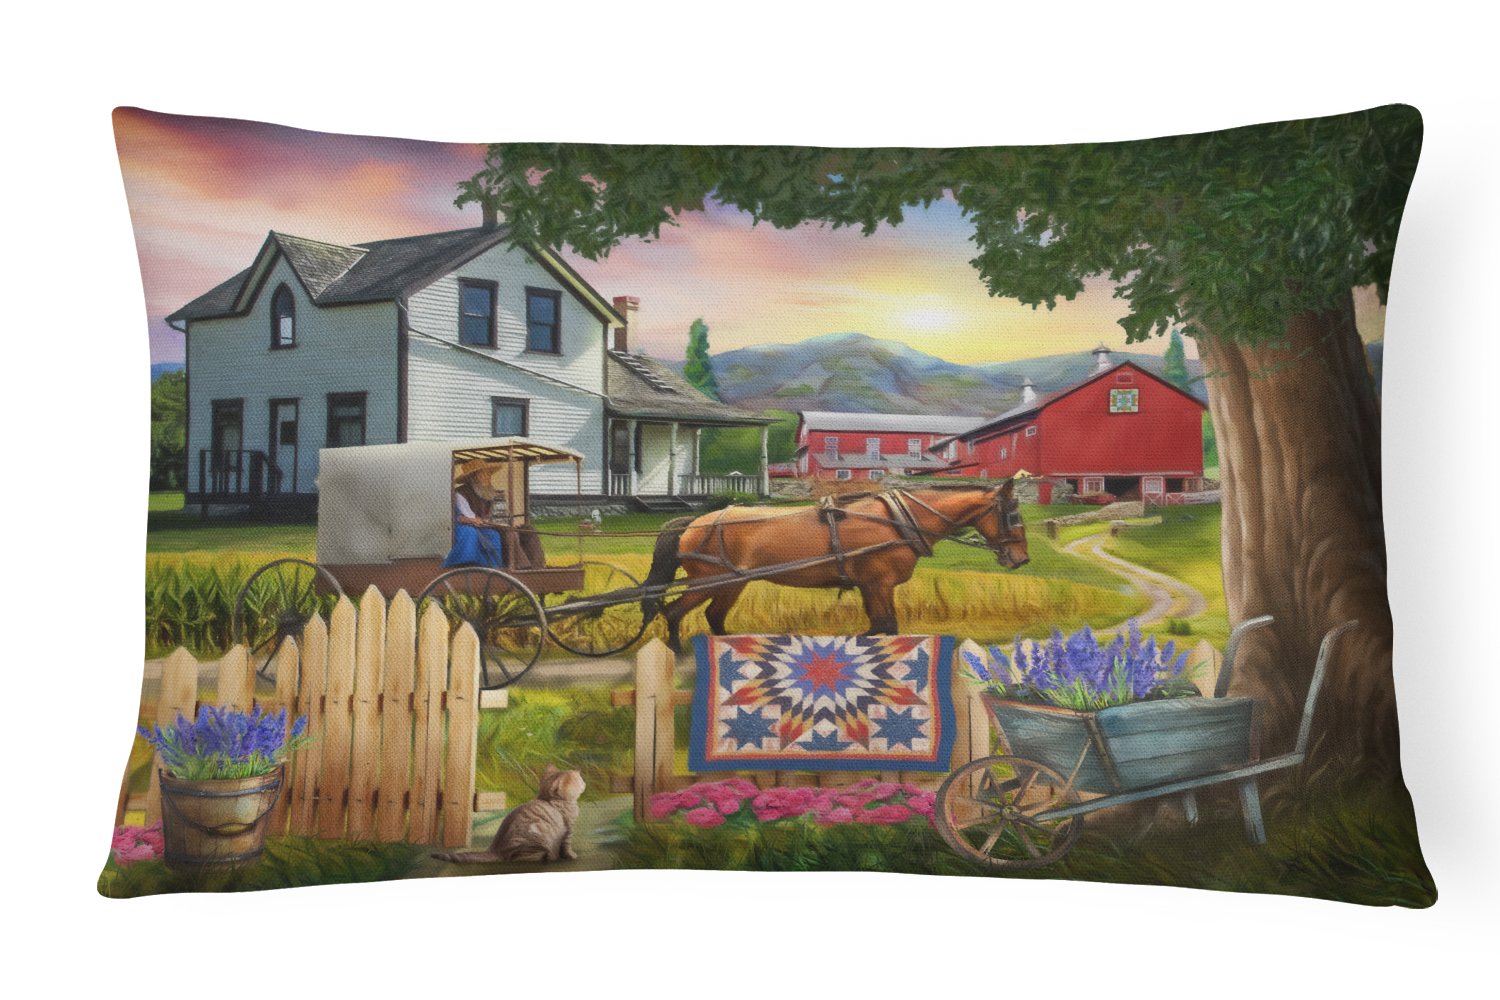 Headed Home for Dinner Farm Canvas Fabric Decorative Pillow PTW2071PW1216 by Caroline's Treasures